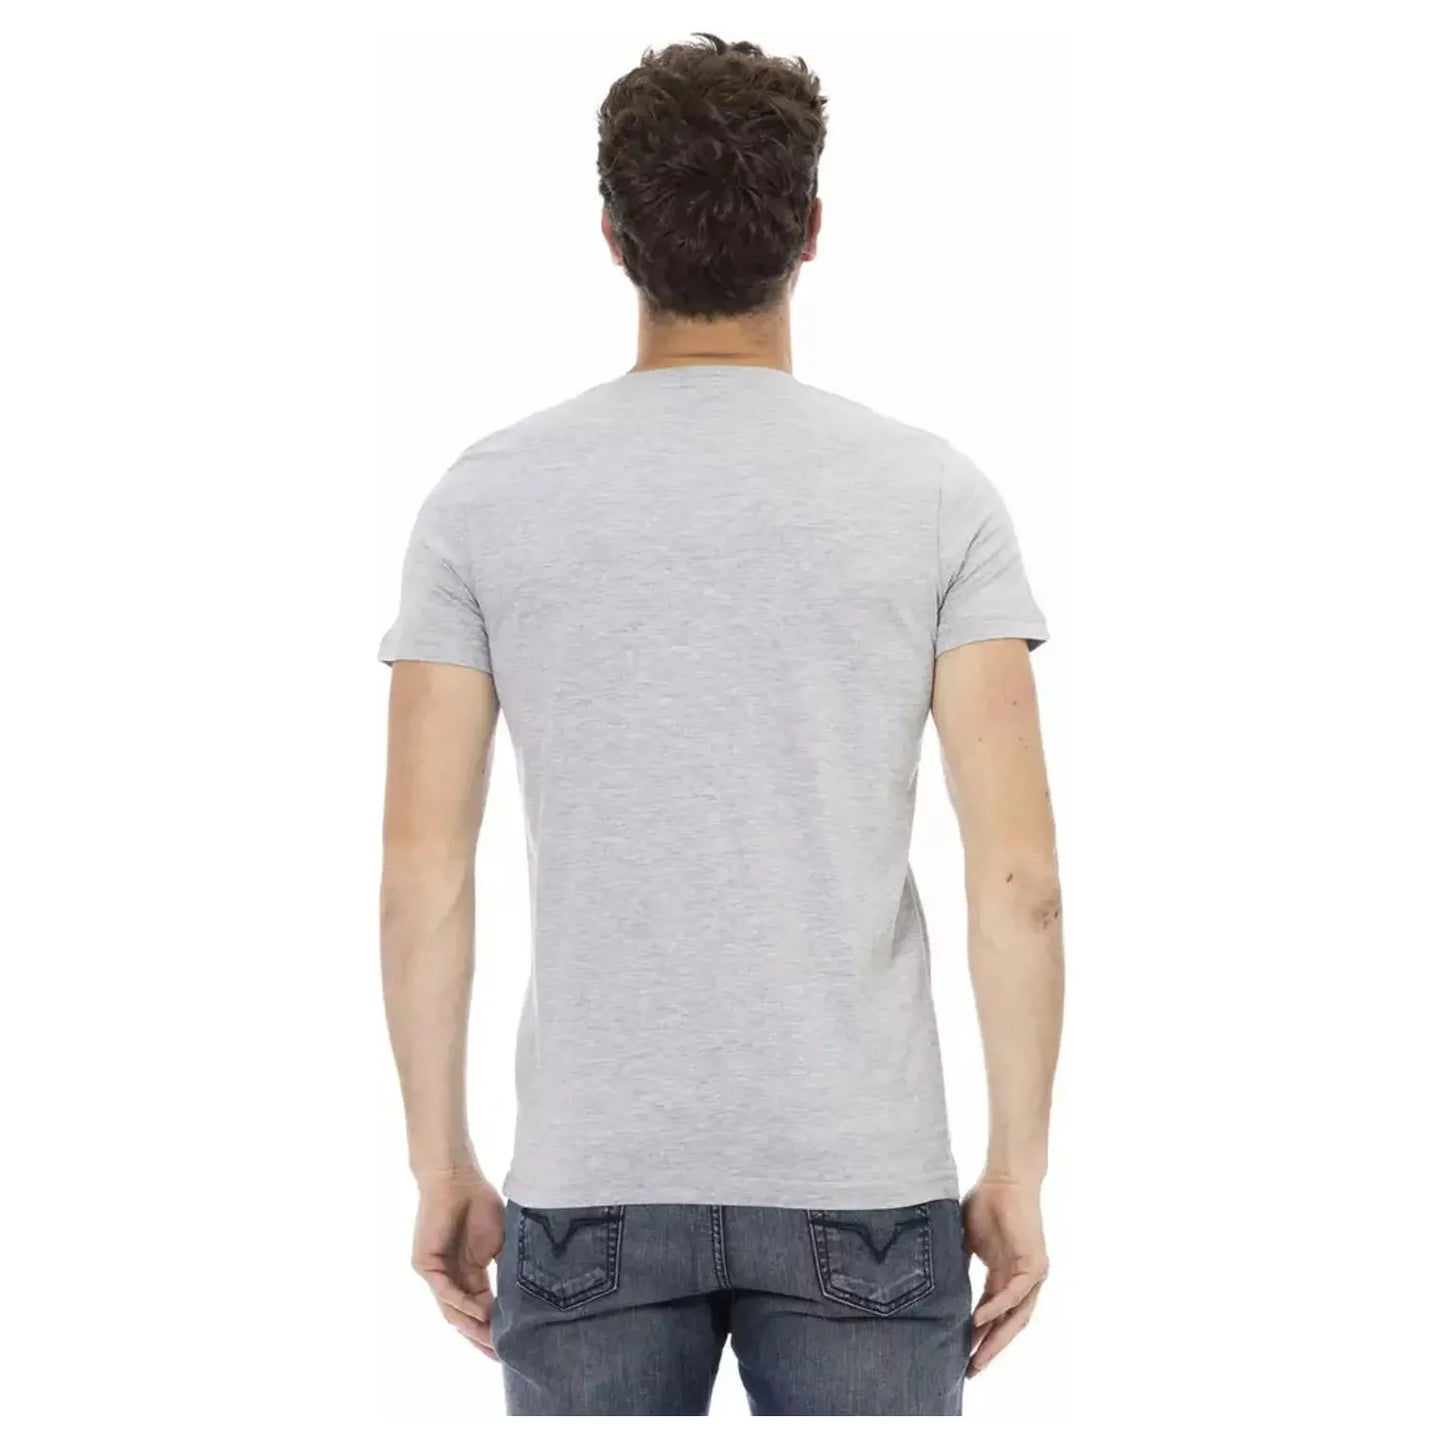 Trussardi Action Chic V-Neck Tee with Front Print in Gray gray-cotton-t-shirt-76